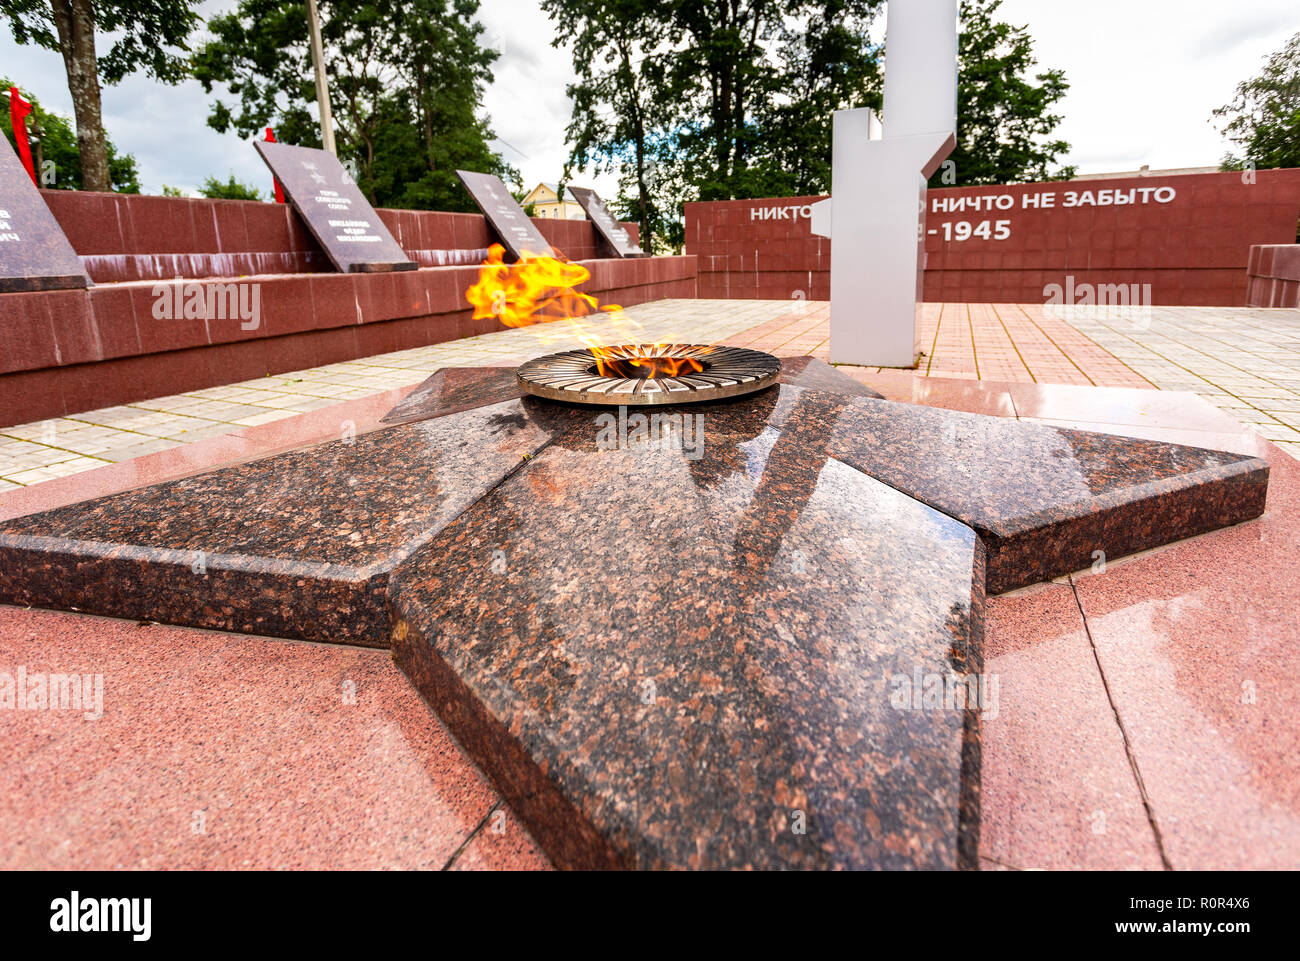 Borovichi, Russia - August 7, 2017: Eternal flame at the memory complex of the Victory in the Great Patriotic War Stock Photo